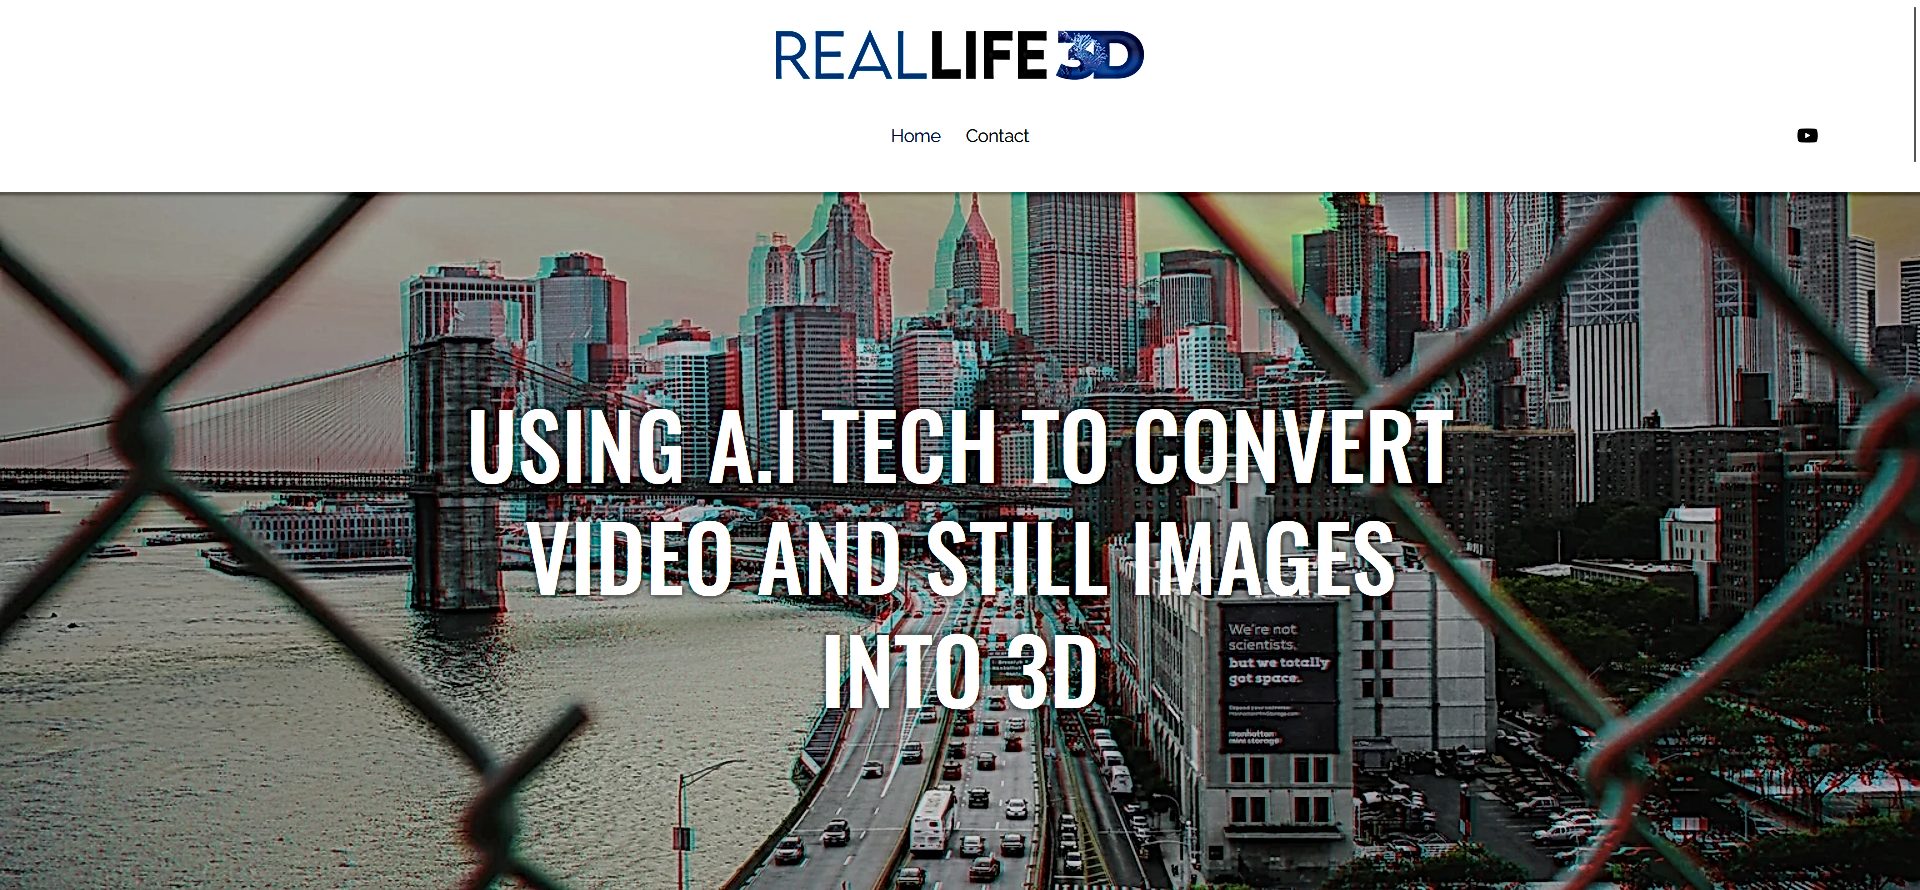 Real Life 3D featured